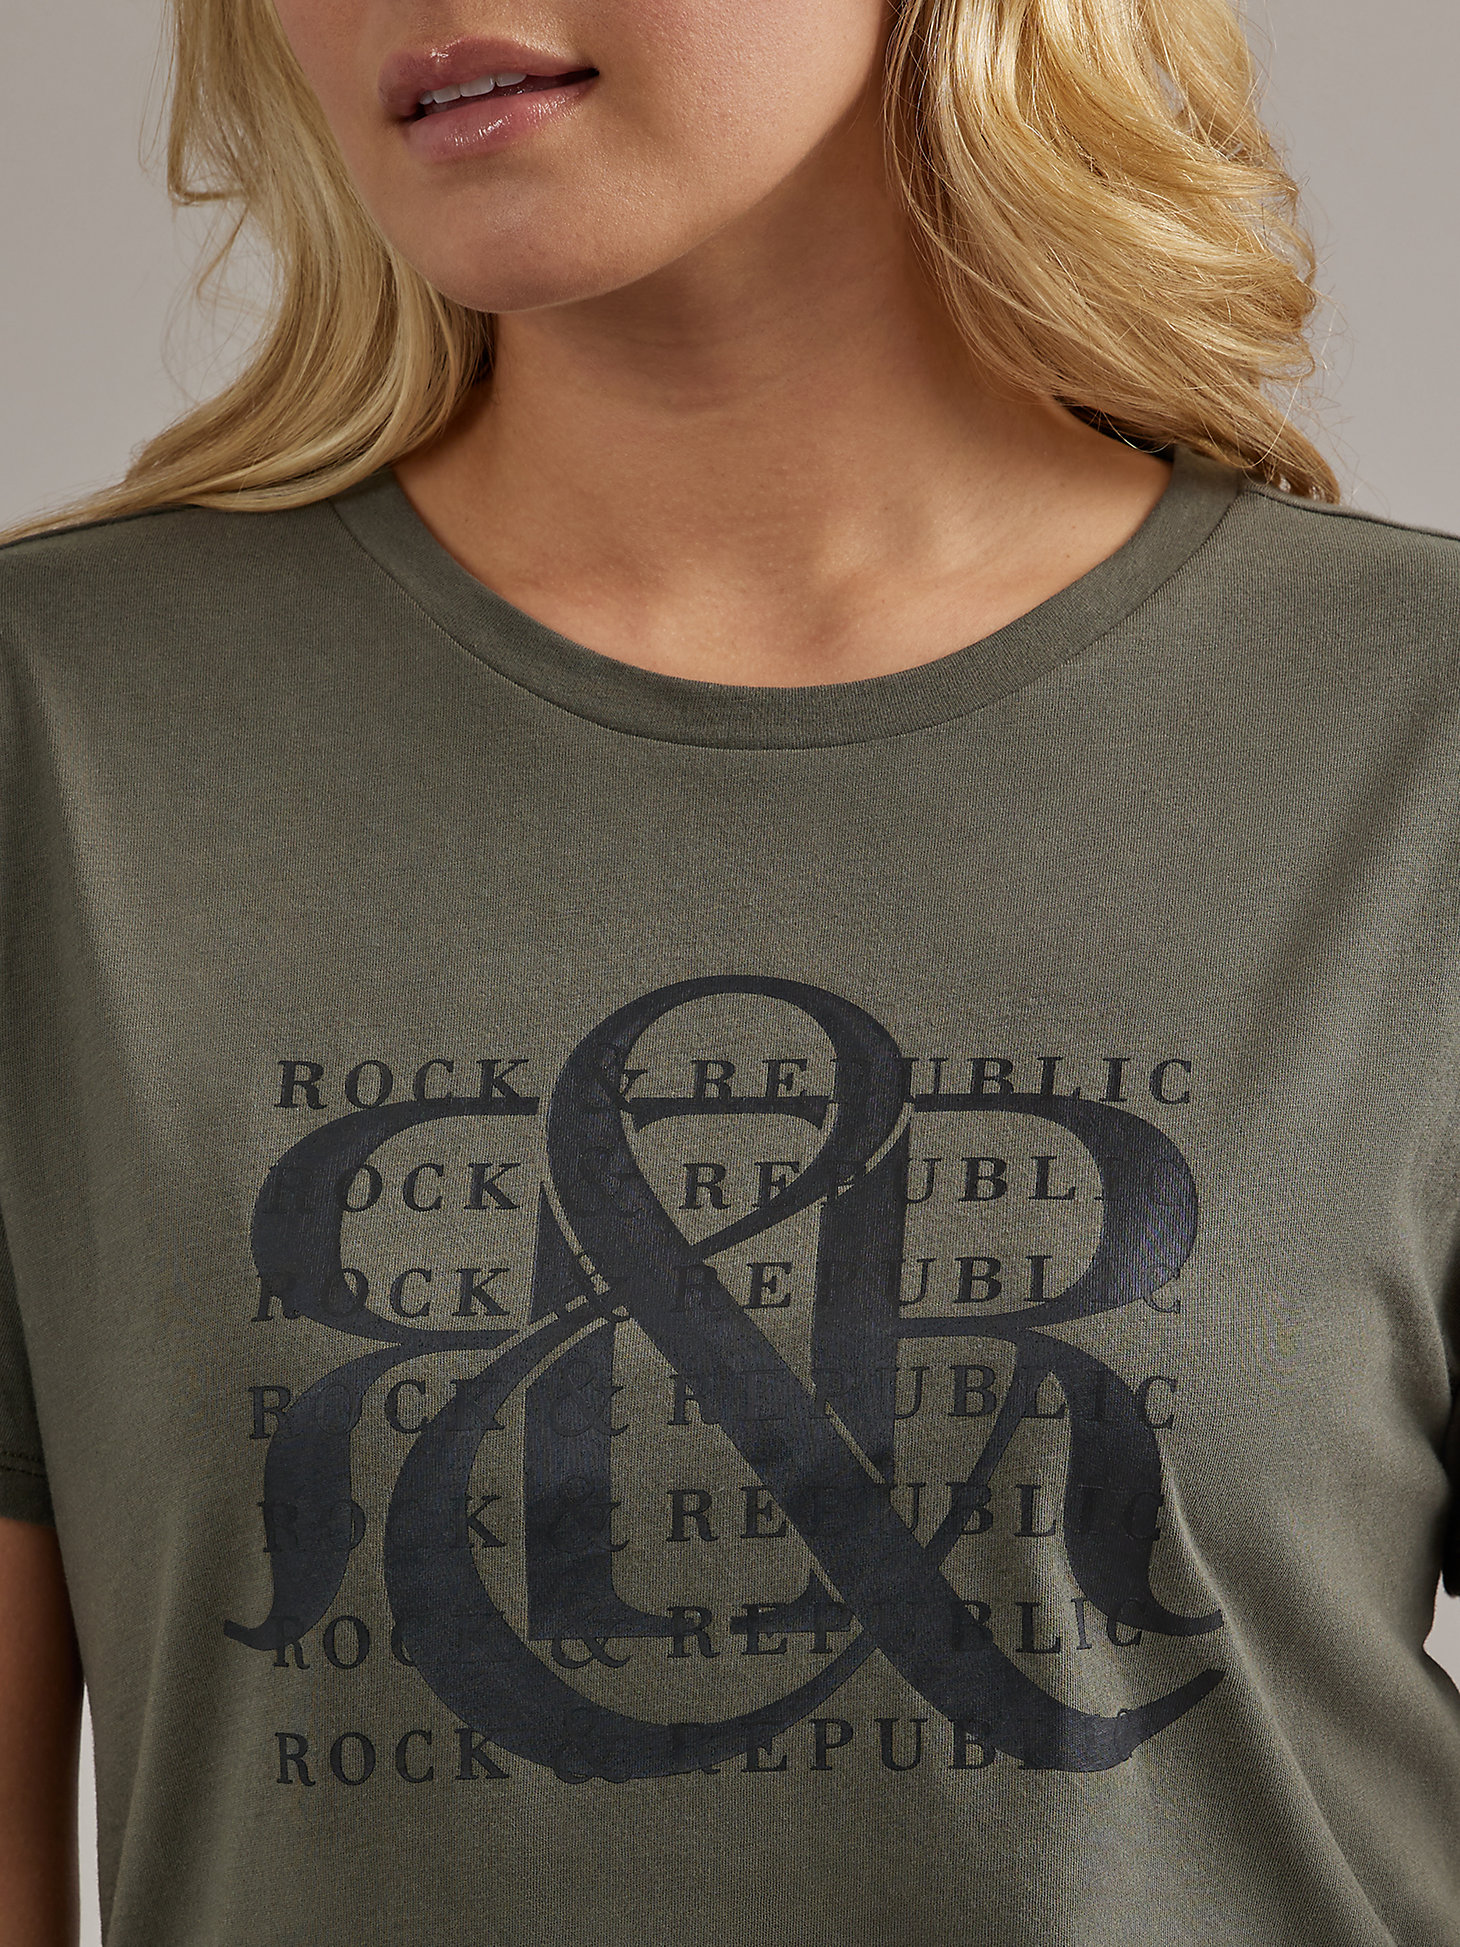 Short Sleeve Repeat Logo Tee in Olive alternative view 1